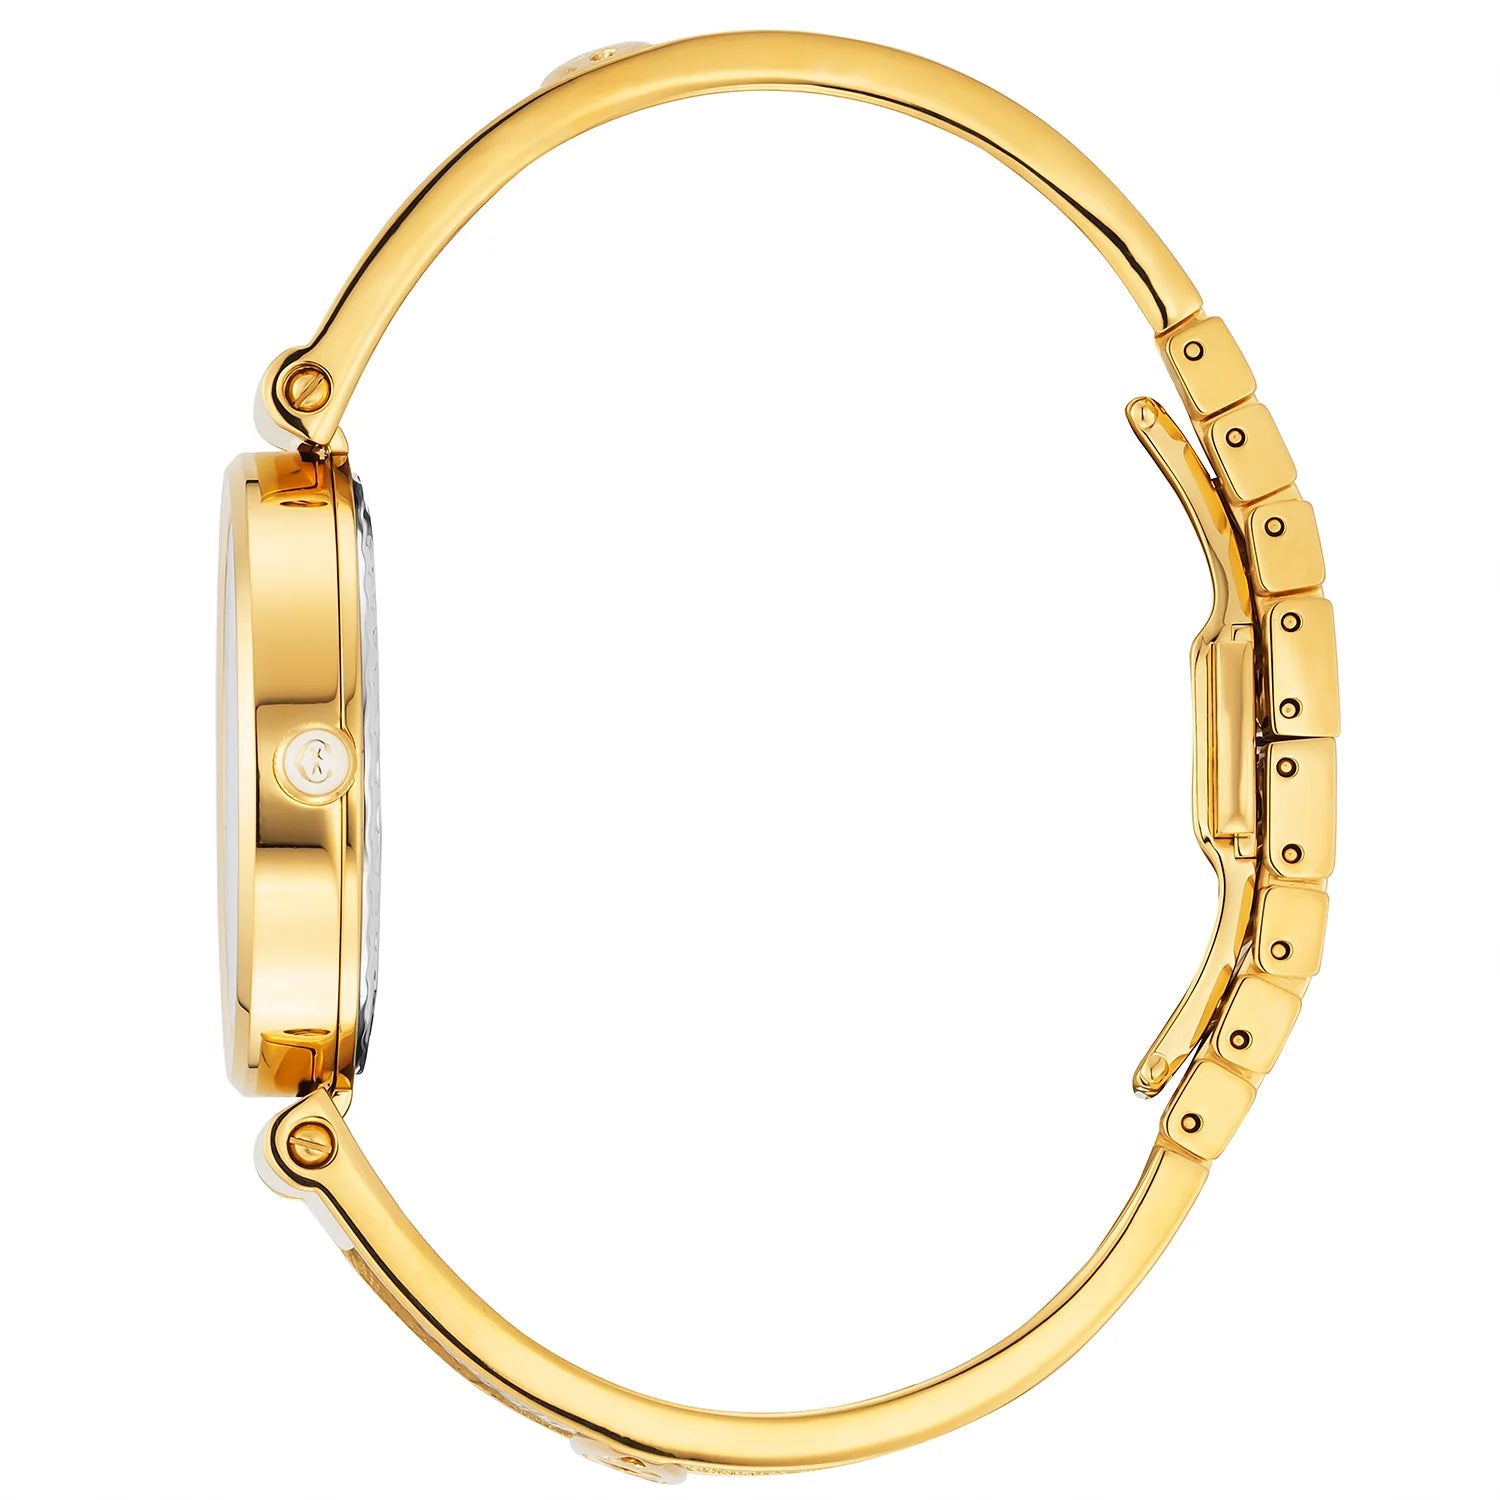 Forever Watch Green and Yellow Gold - Charriol Geneve -  Watch